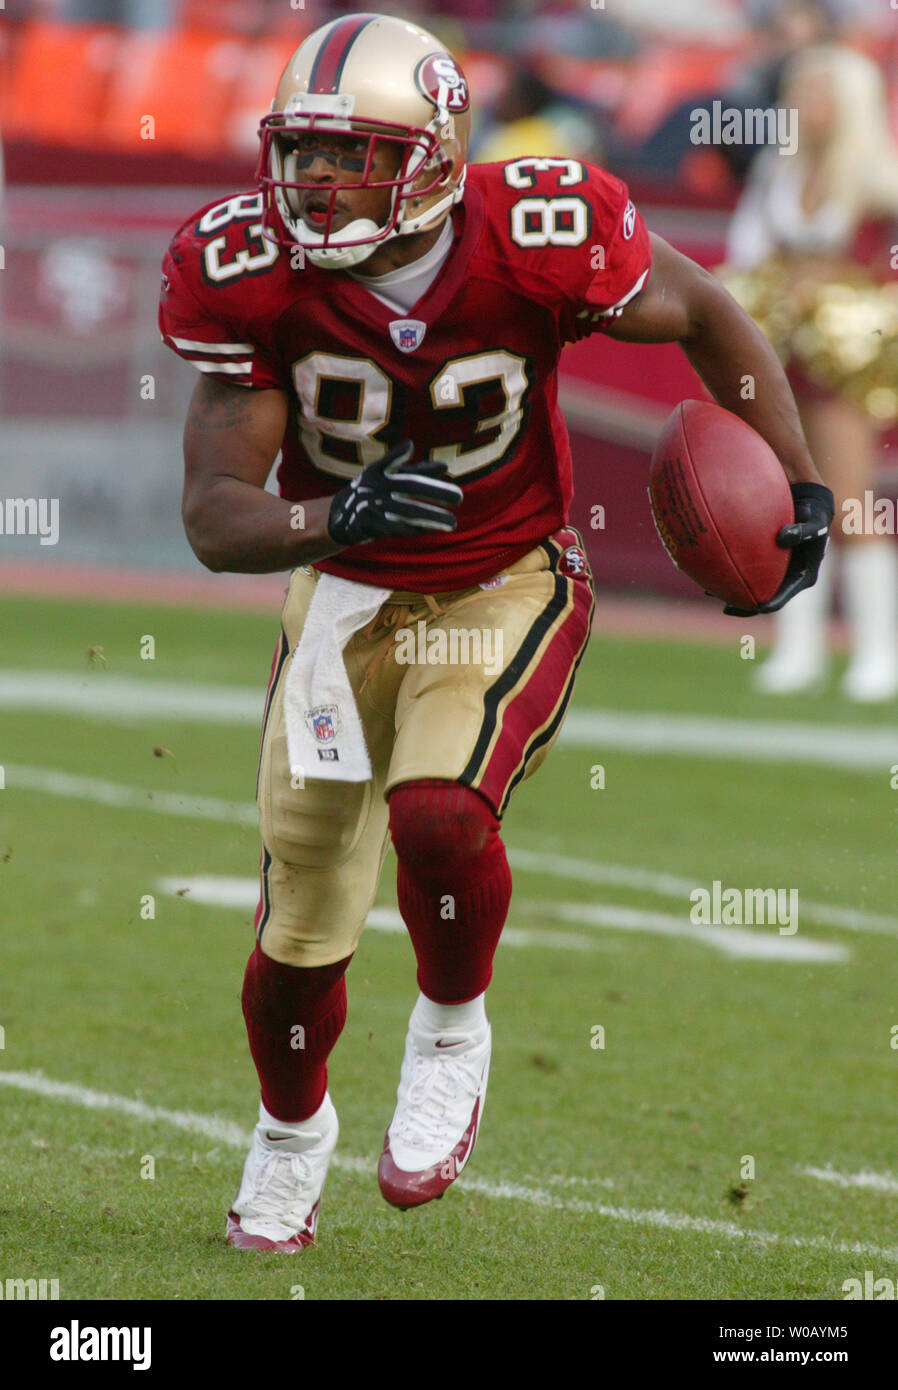 San Francisco 49ers WR Amaz Battle (83) runs with a Tim Rattay pass against the Carolina Panthers at Monster Park in San Francisco on November 14, 2004.  The Panthers beat the 49ers 37-27.   (UPI Photo/Terry Schmitt) Stock Photo